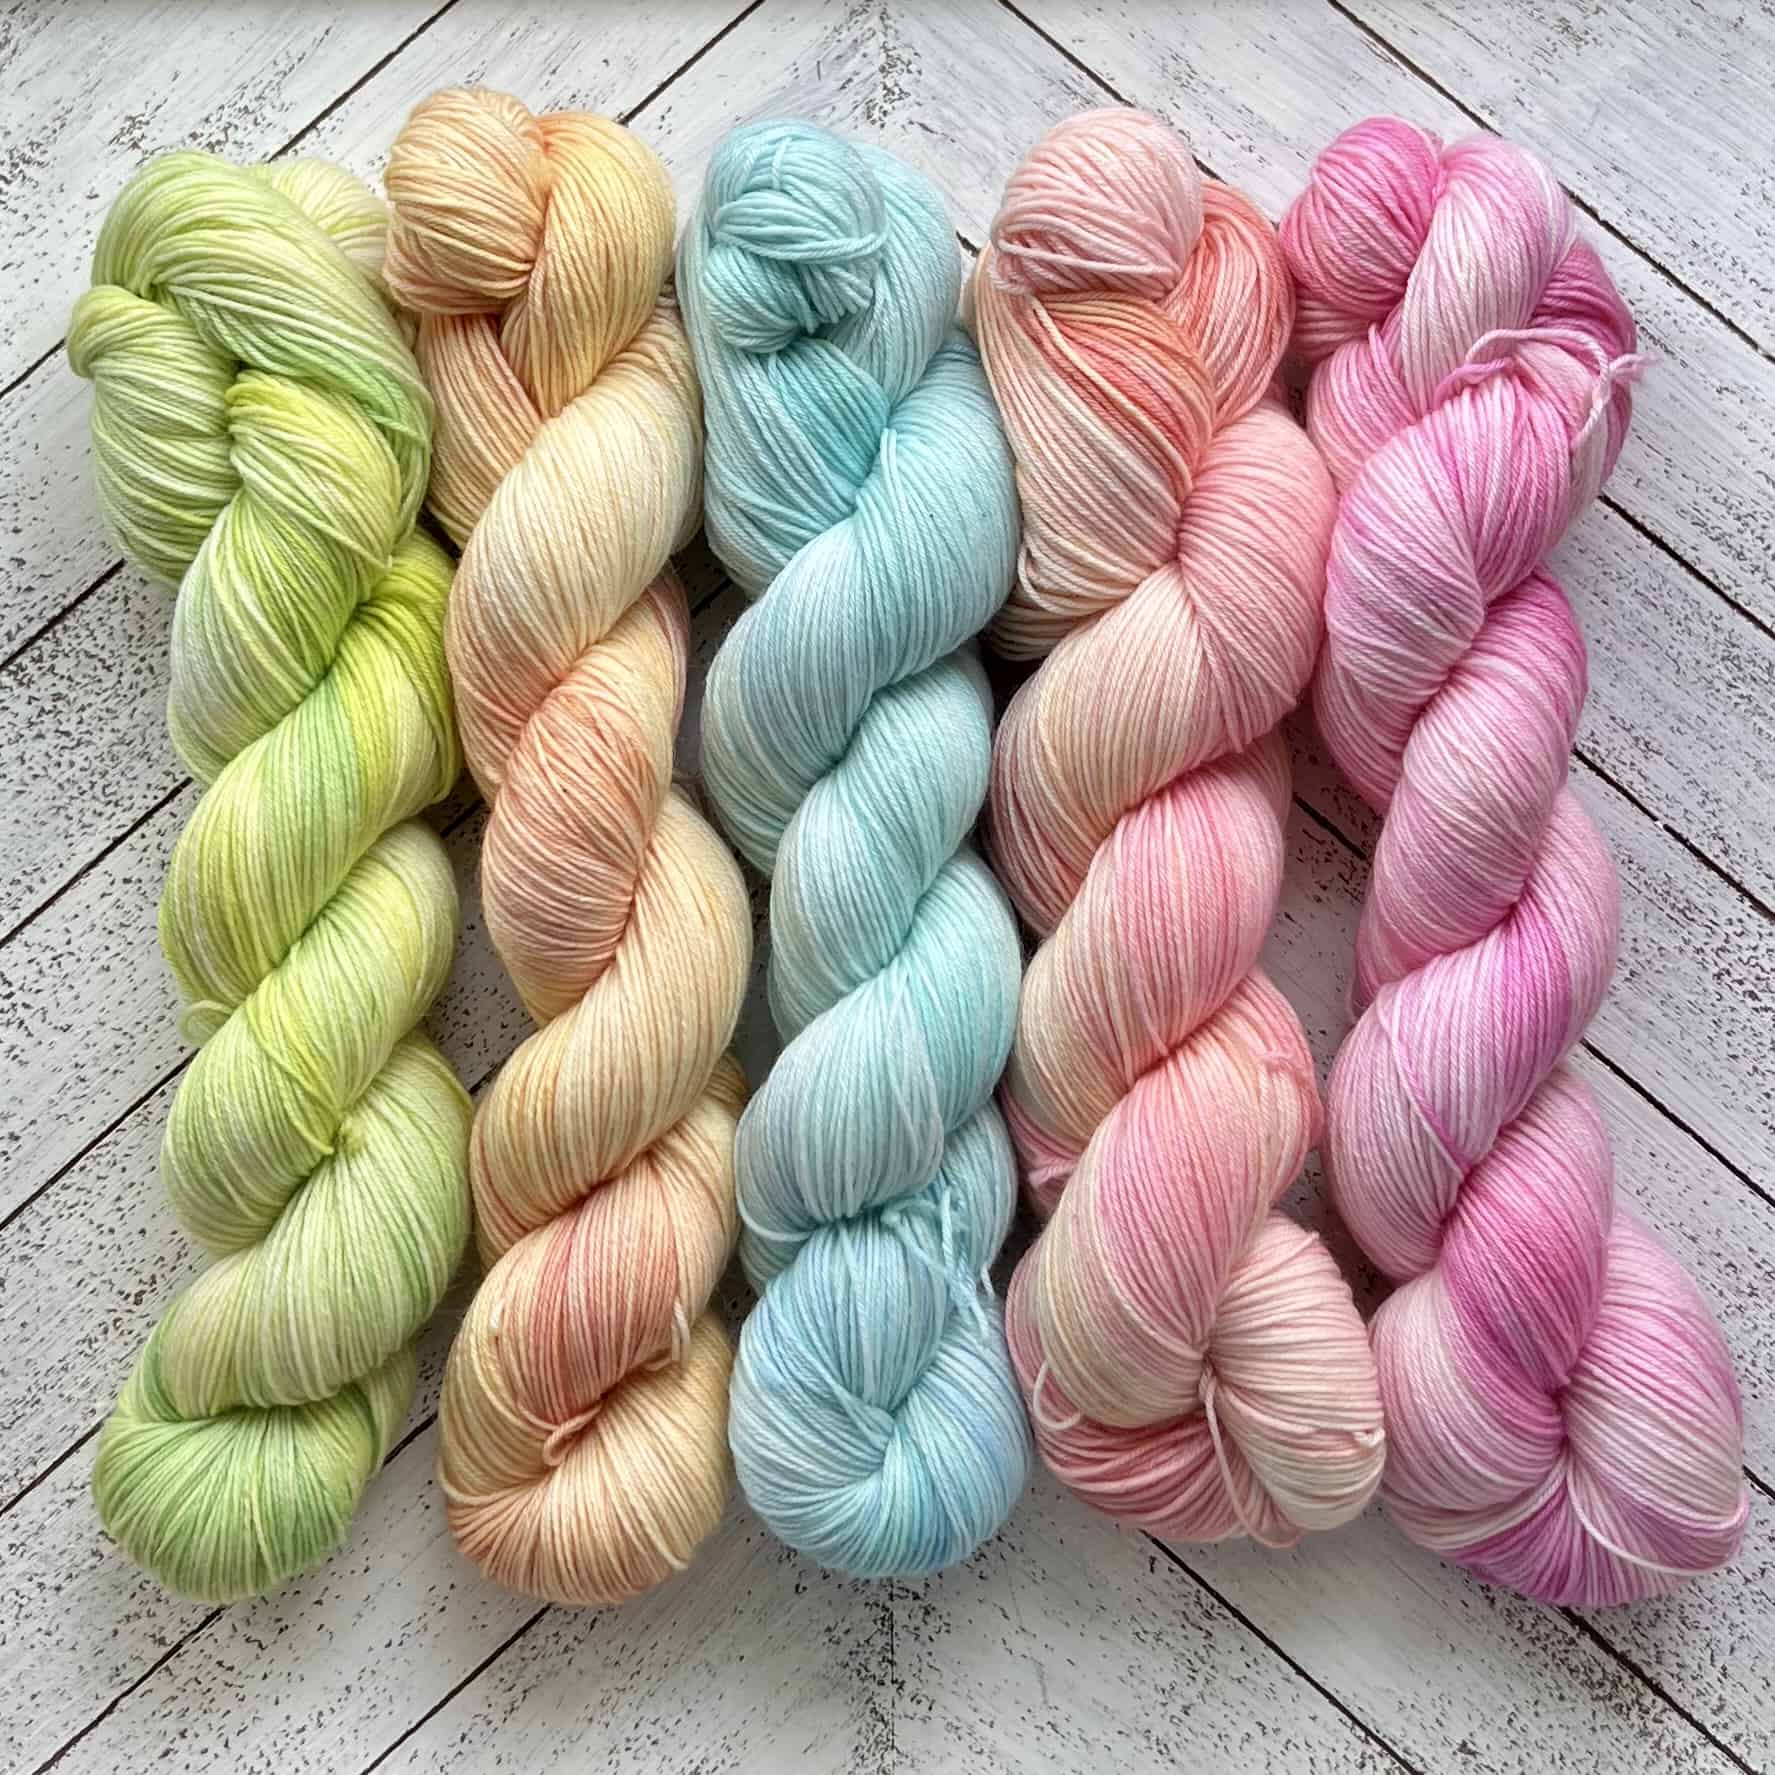 Five skeins of yarn in pastel green, yellow, blue, peach and pink.